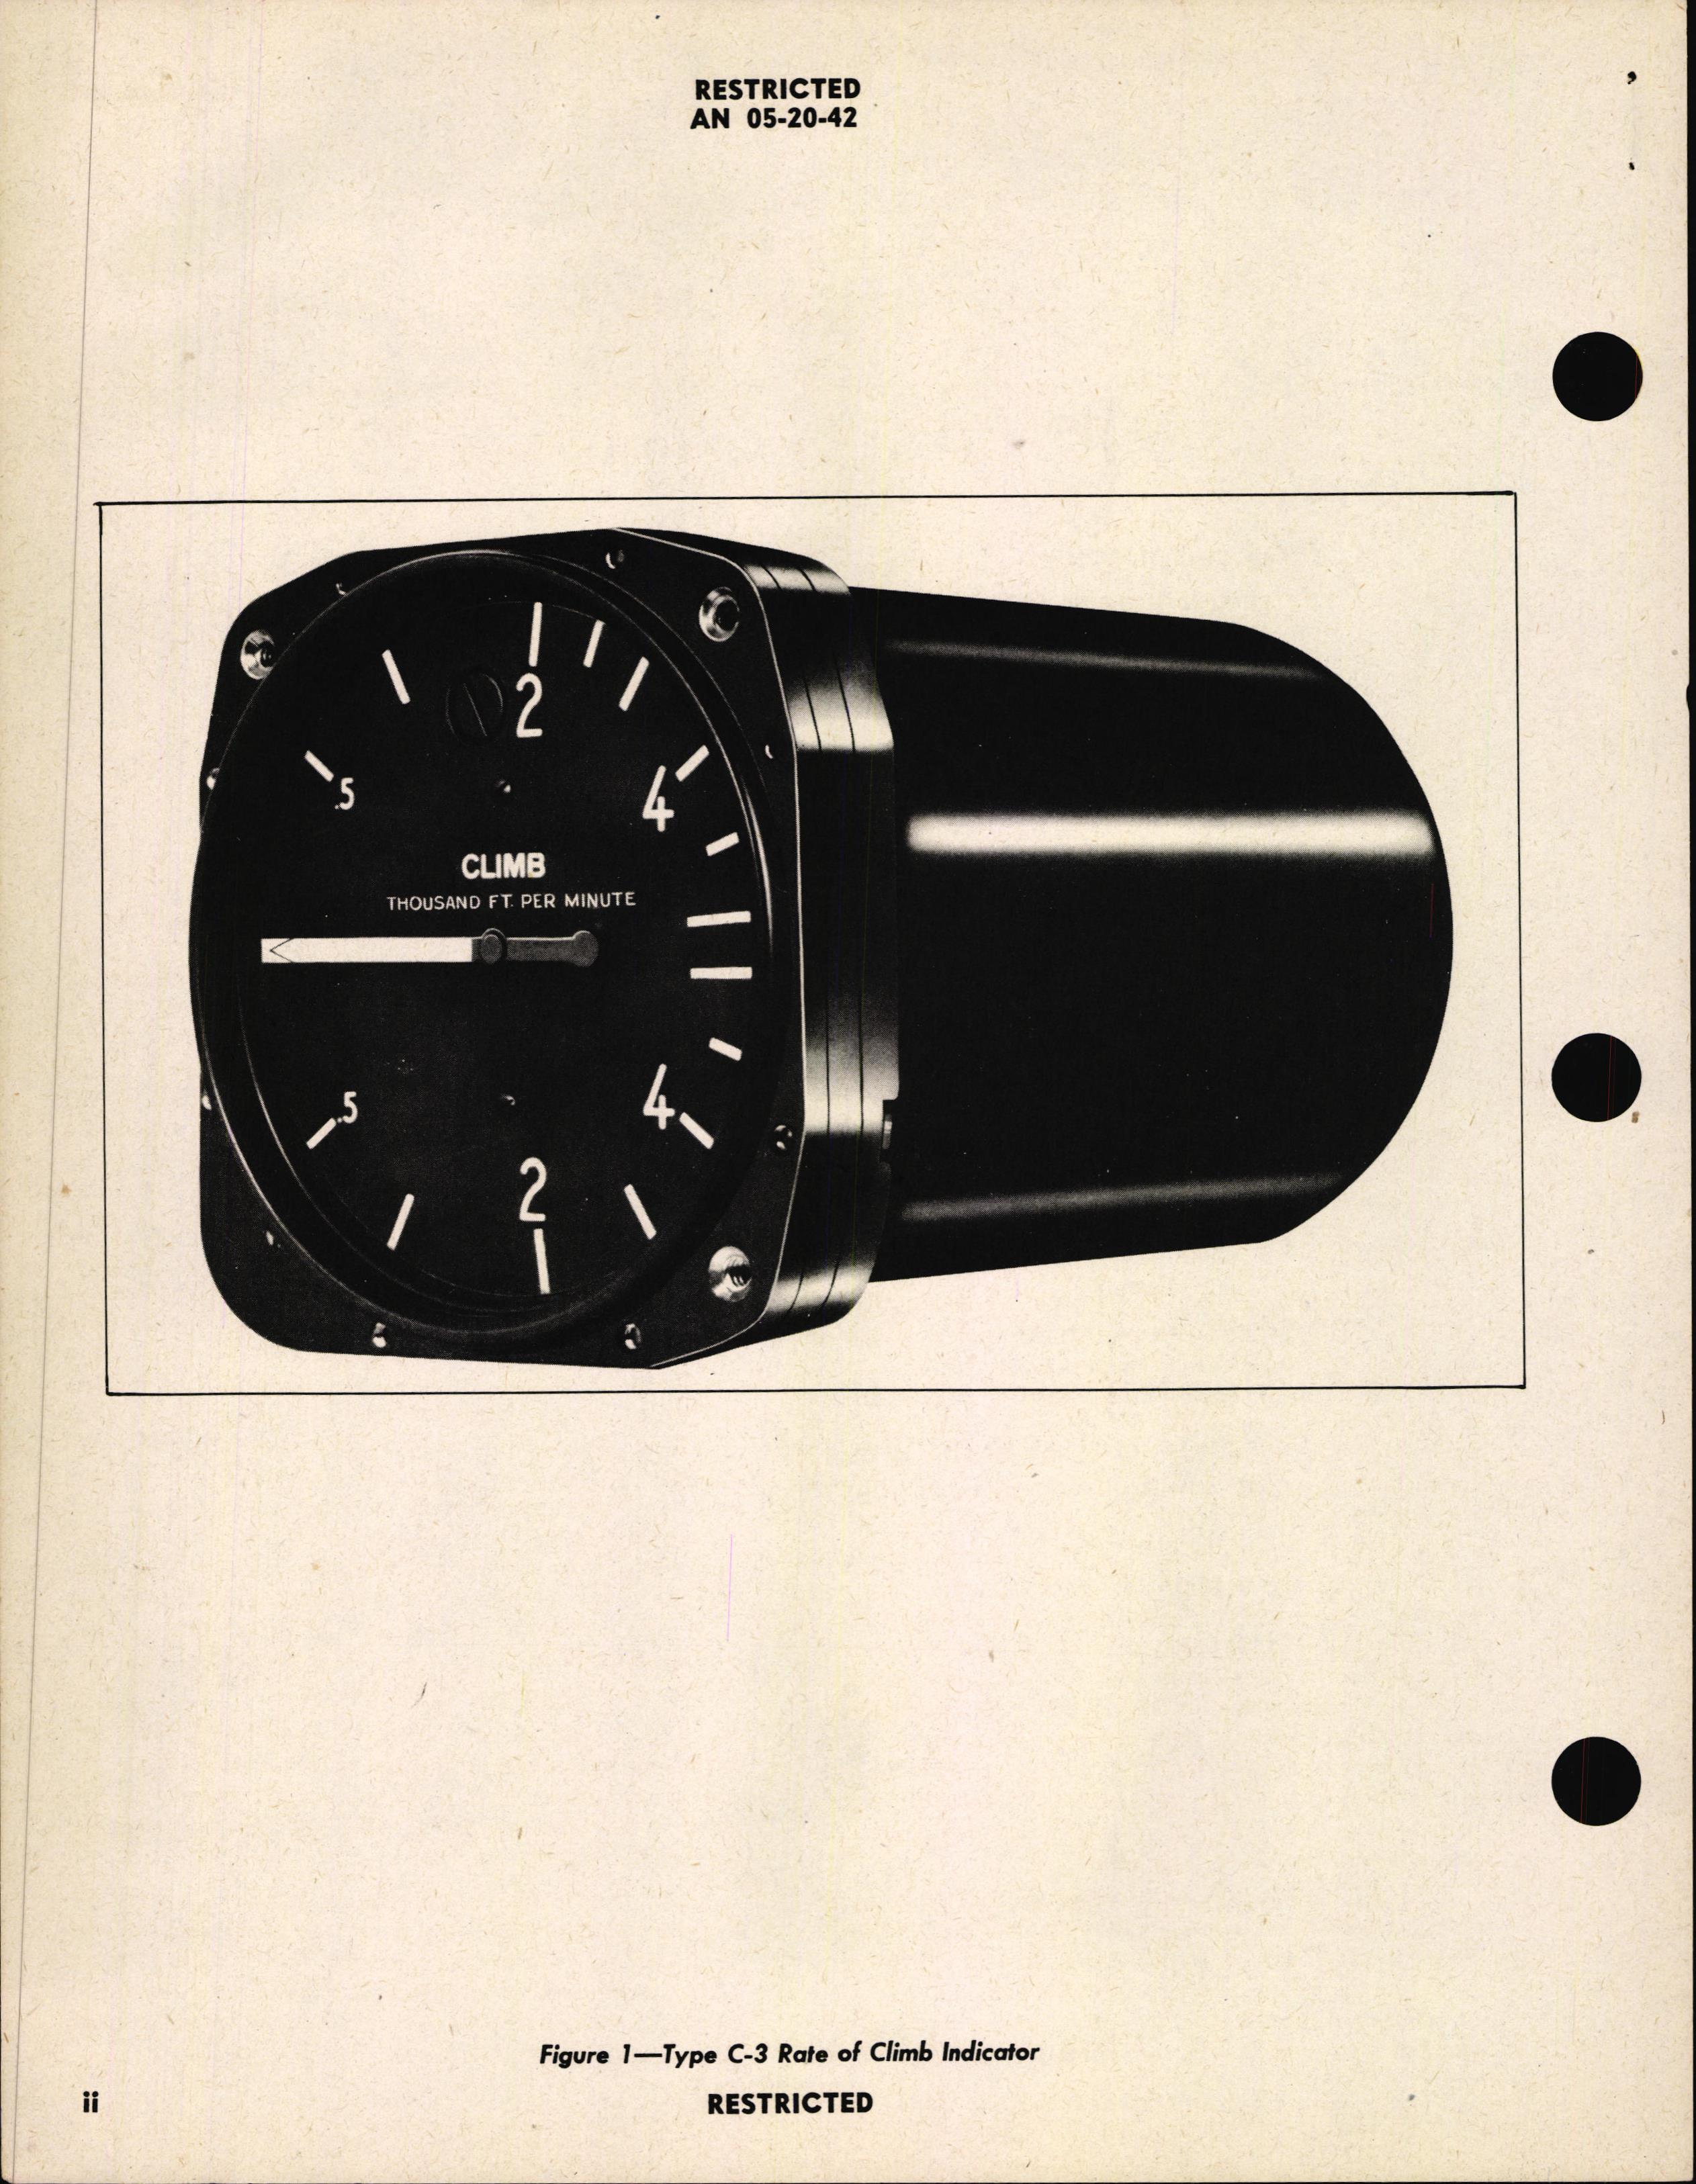 Sample page 4 from AirCorps Library document: Handbook of Instructions with Parts Catalog for Type C-3 Rate of Climb Indicator